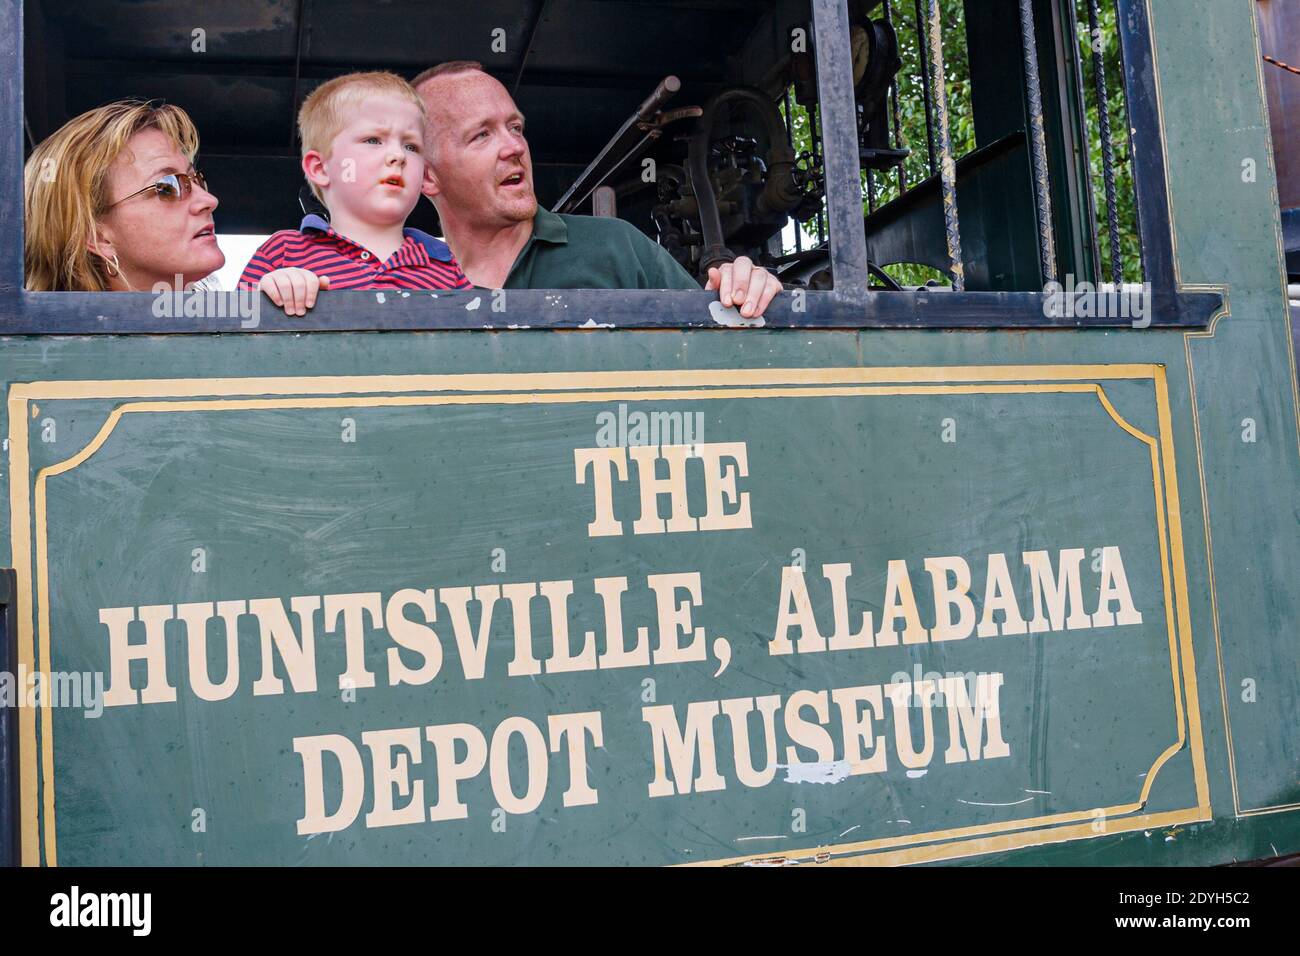 Huntsville Alabama,Depot Museum built 1860 train station,mother father son family visiting visitors, Stock Photo